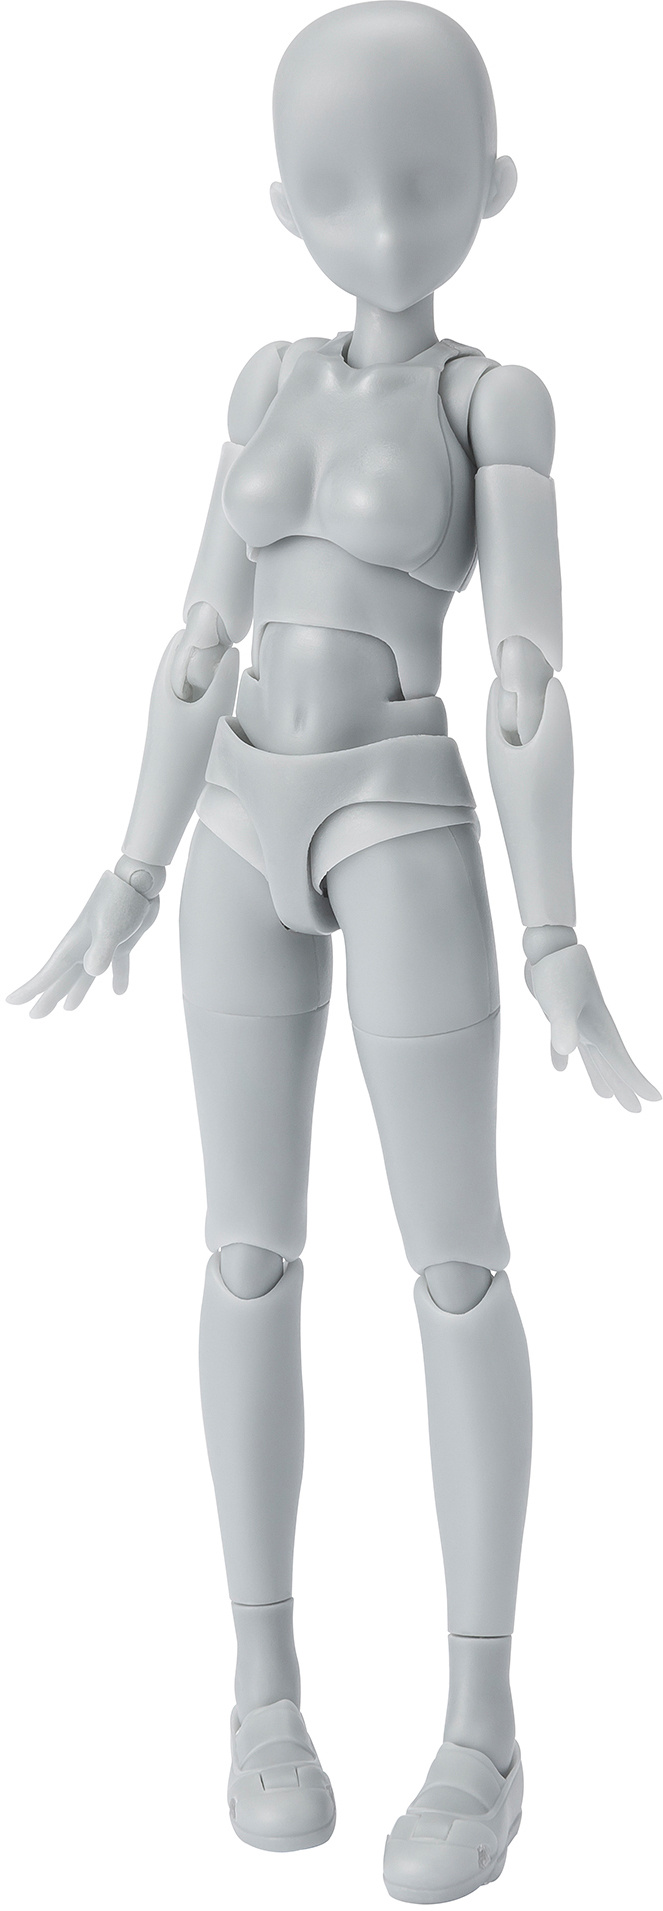 SH Figuarts Body-chan -Sports- Edition DX SET (Gray Color Ver.)